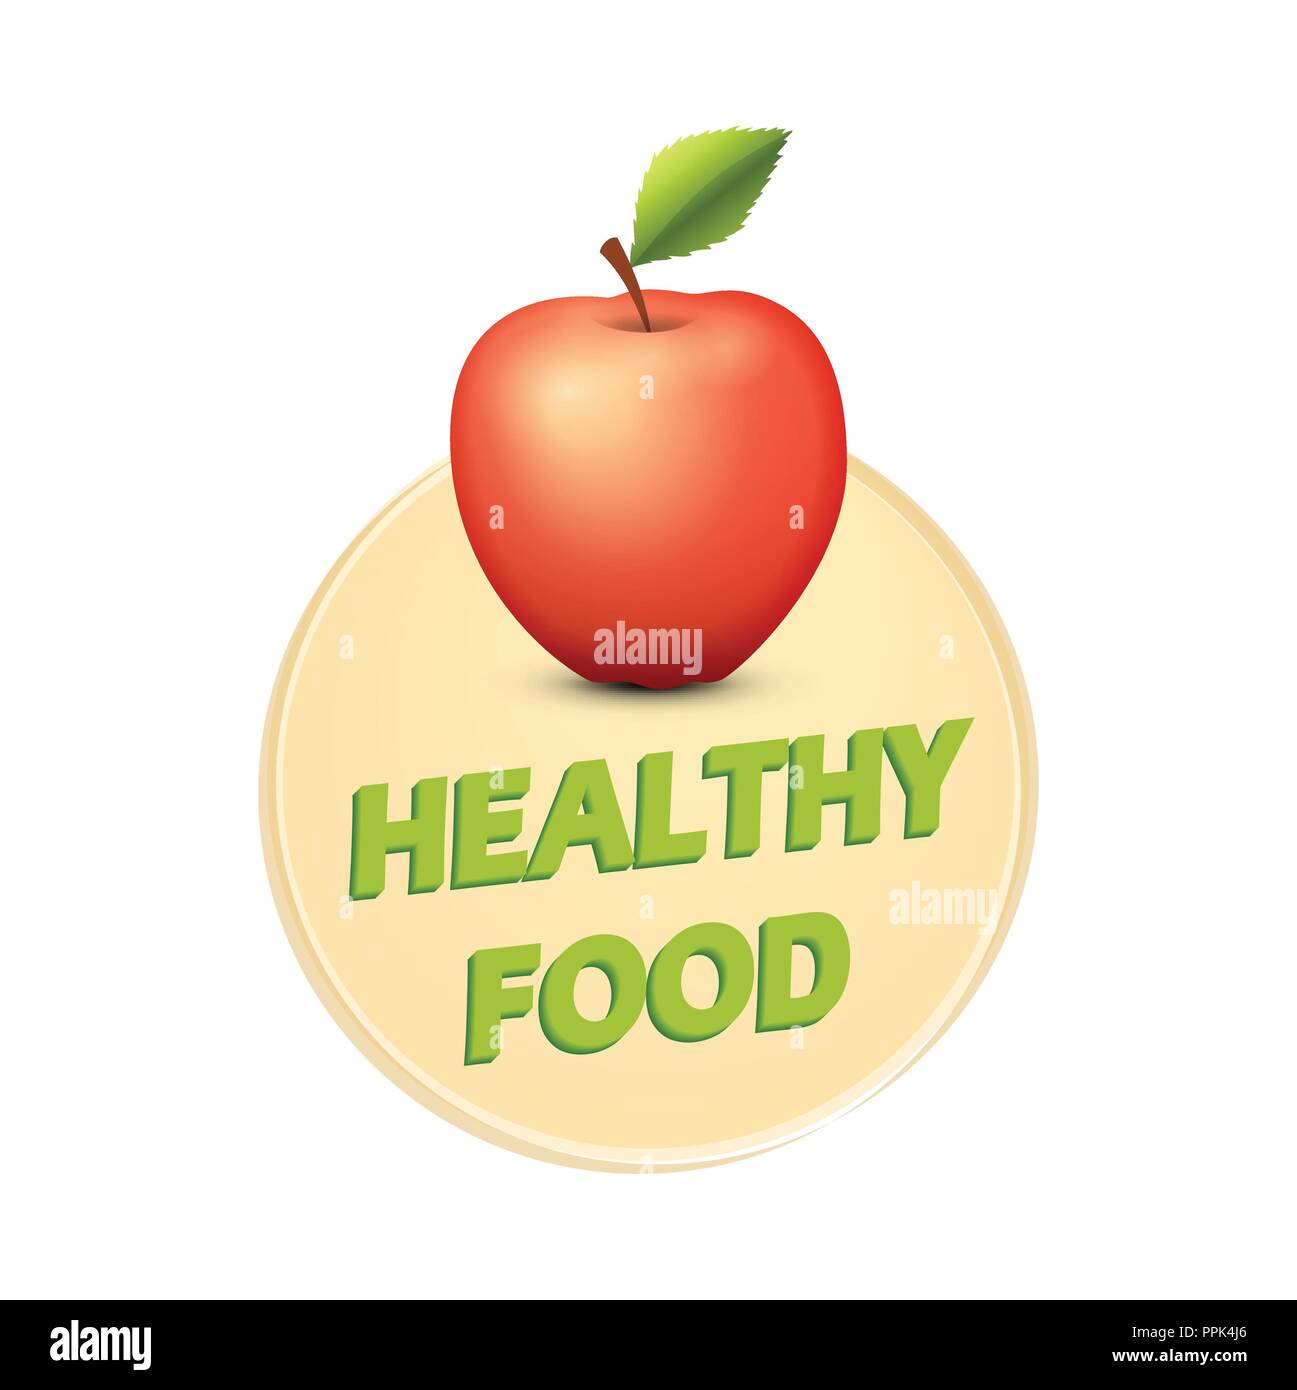 Healthy Eating Poster Stock Photos Healthy Eating Poster Stock